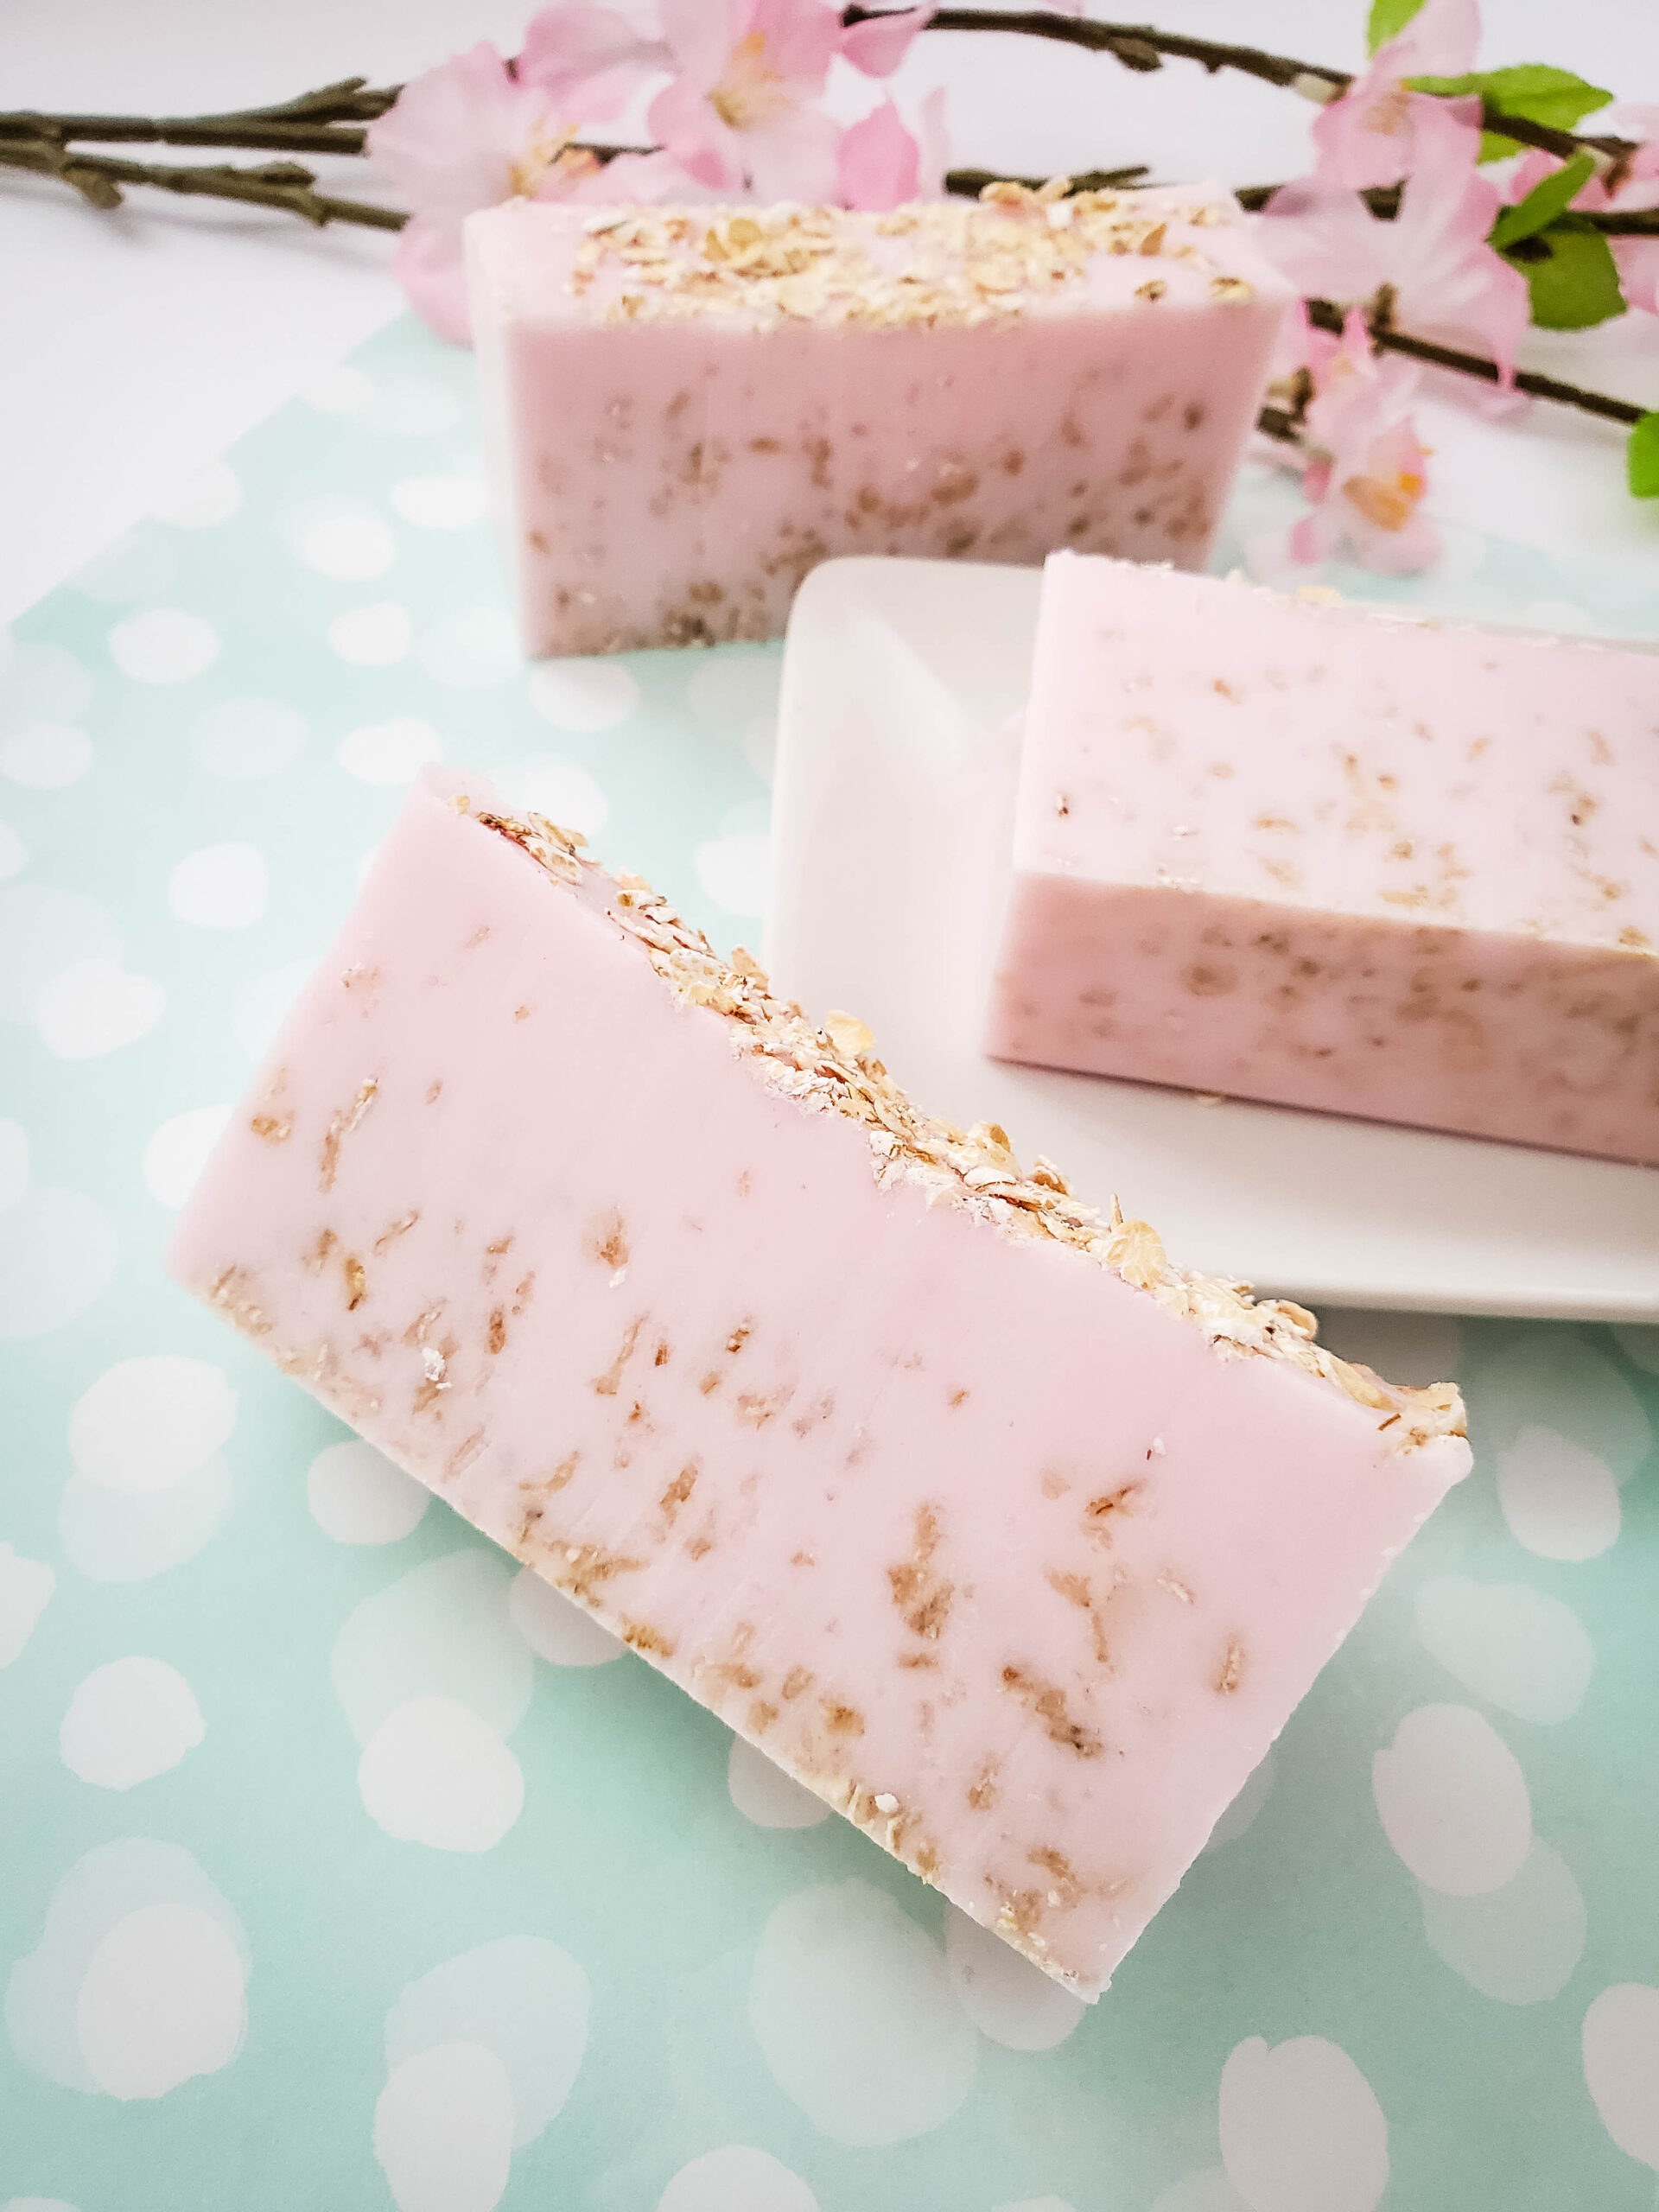 Oatmeal Soap Recipe with Cherry Almond Fragrance Cherry Almond Oatmeal Soap